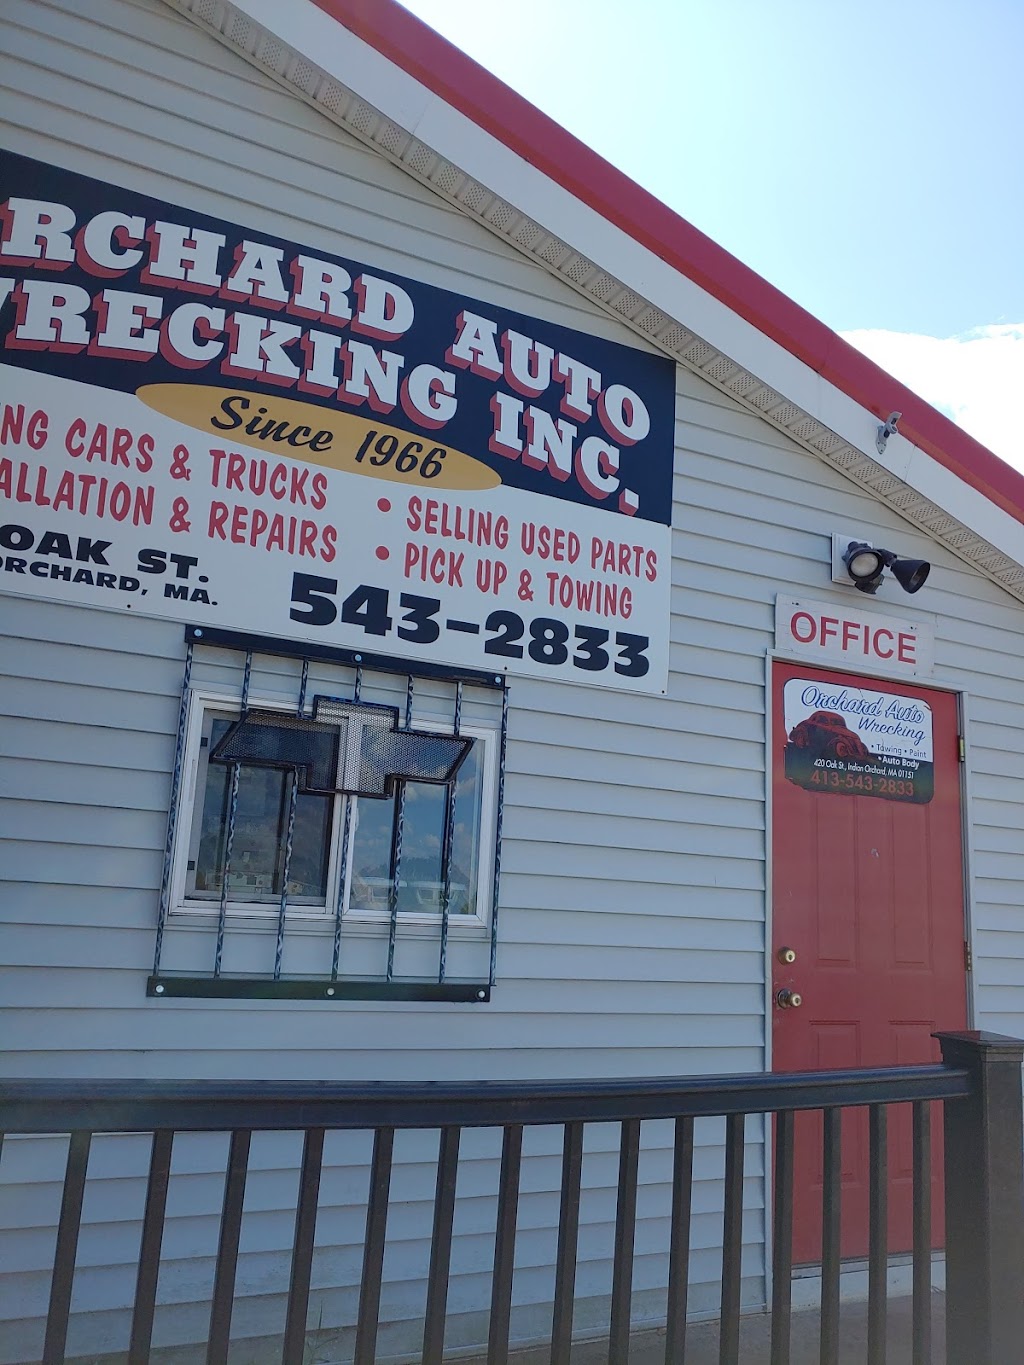 Orchard Auto Wrecking | 420 Oak St, Indian Orchard, MA 01151 | Phone: (413) 543-2833